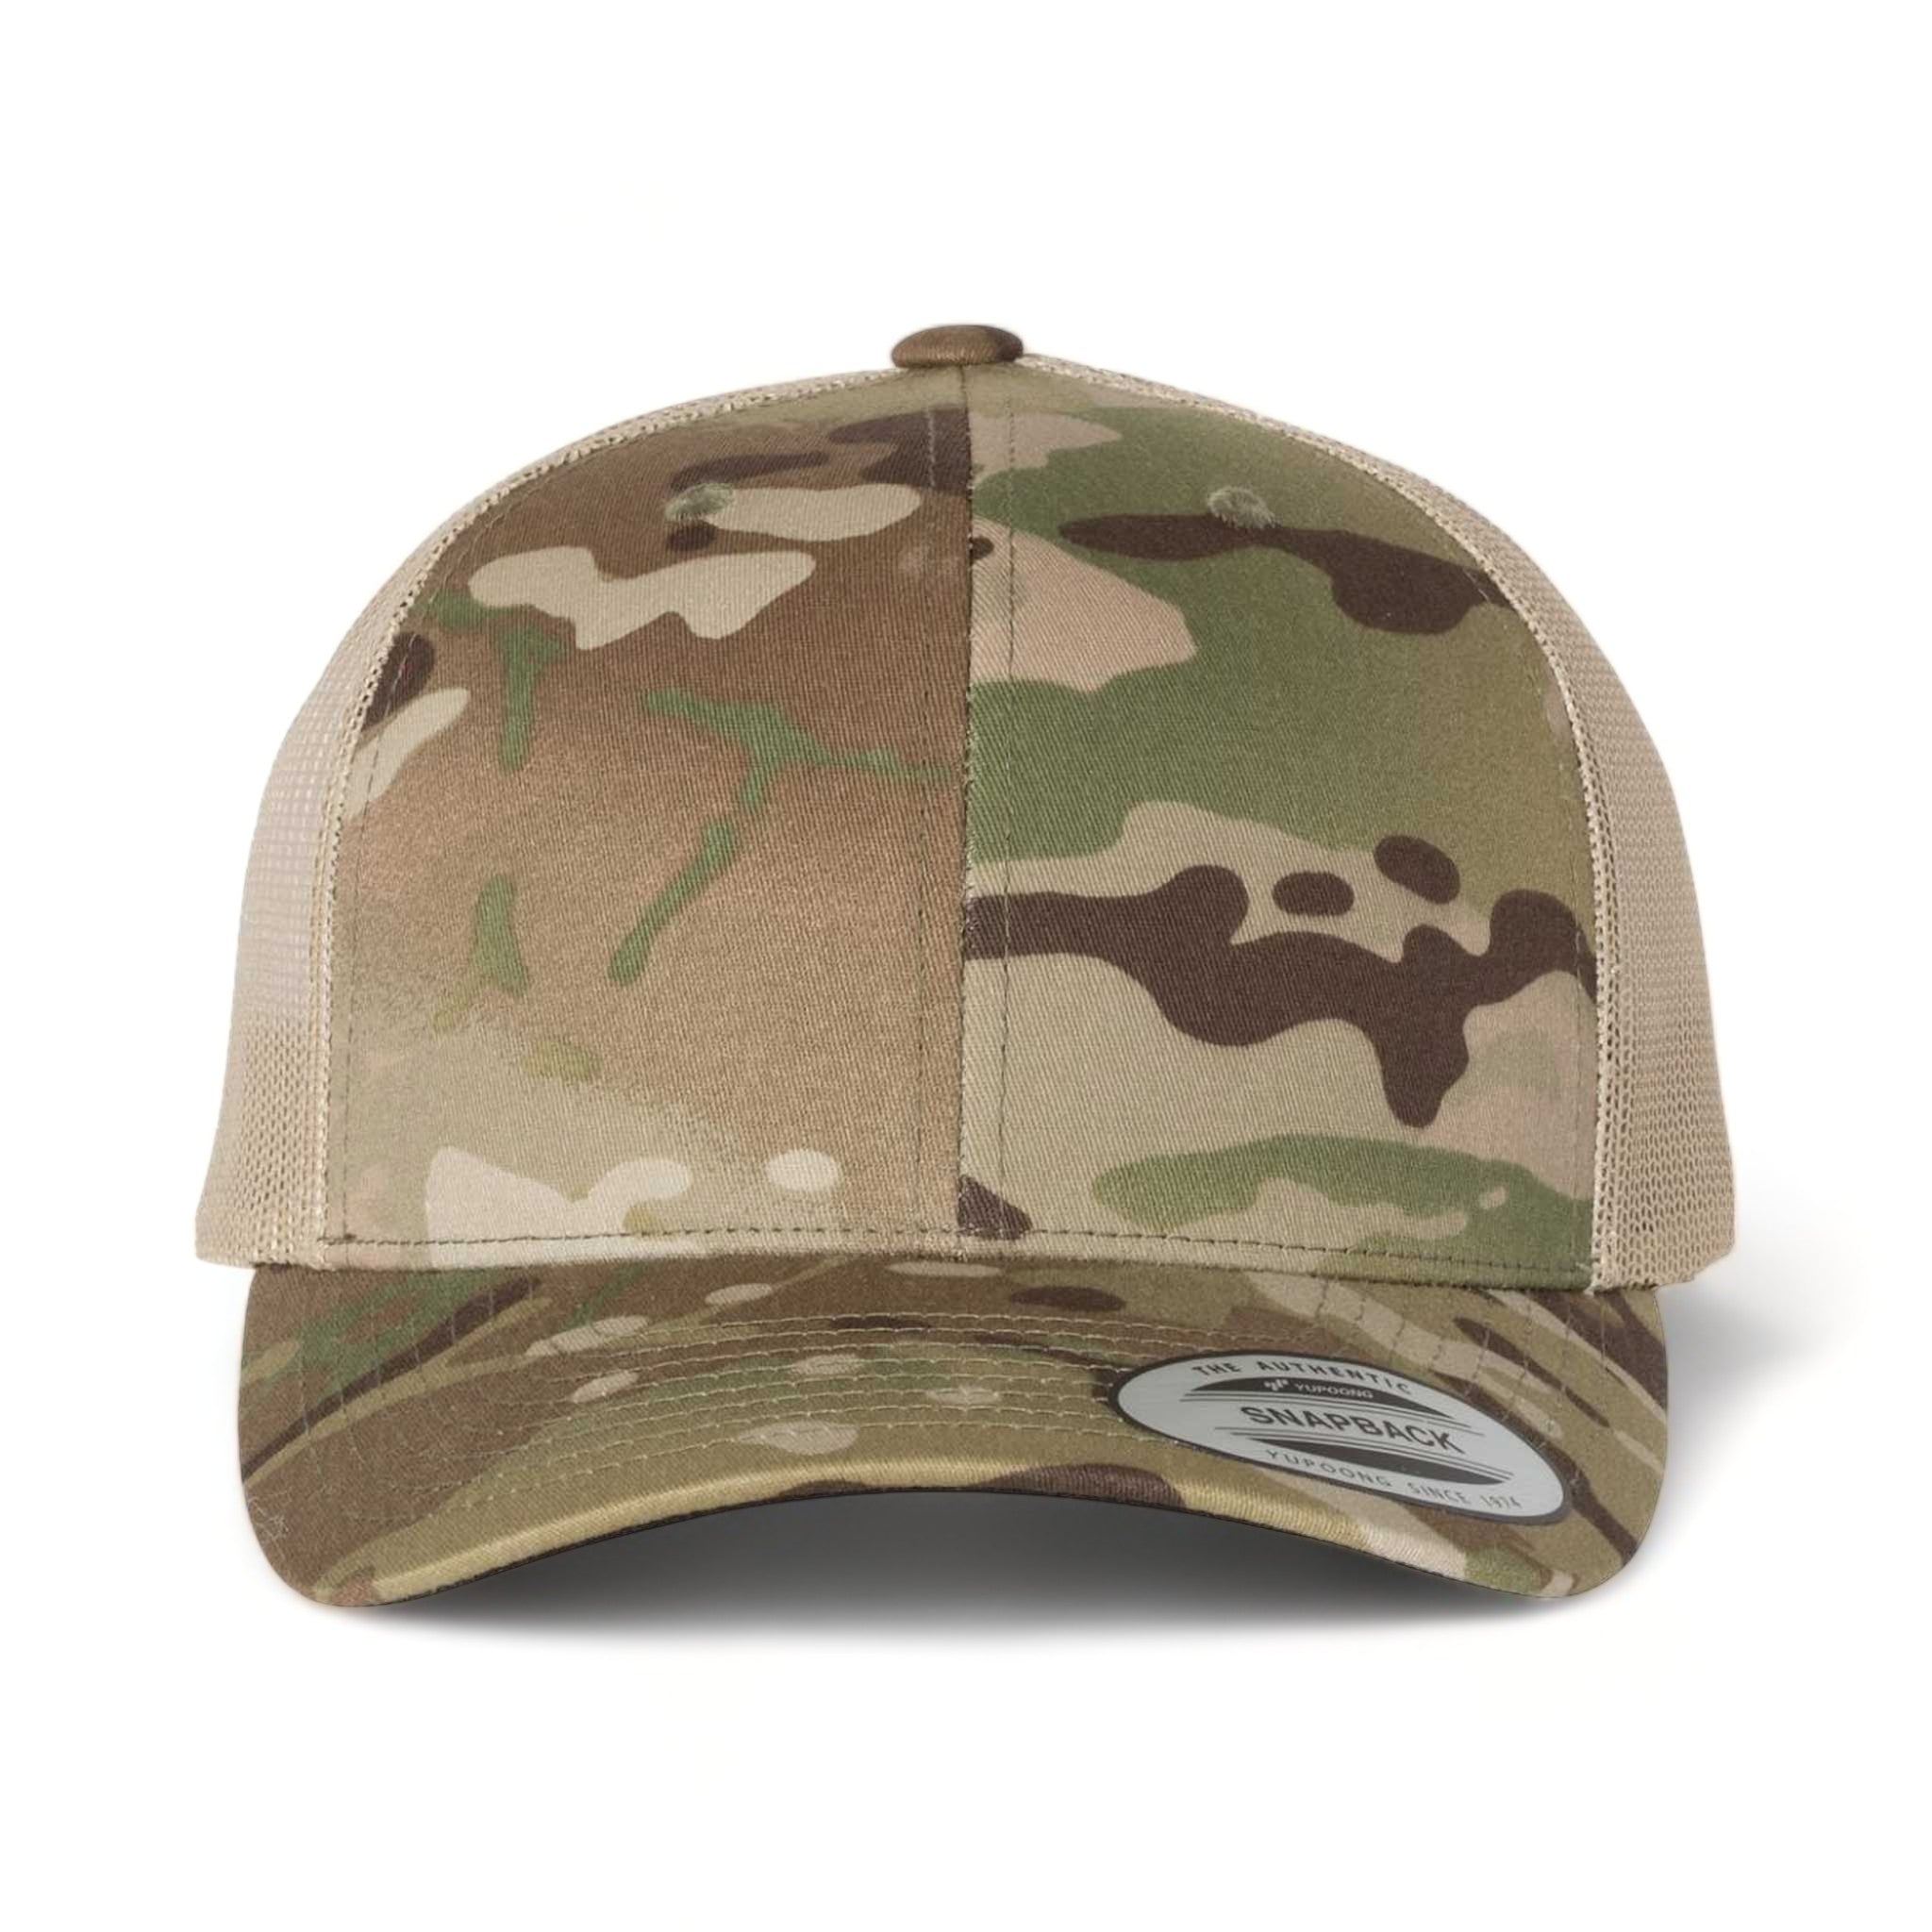 Front view of YP Classics 6606 custom hat in multicam green and khaki